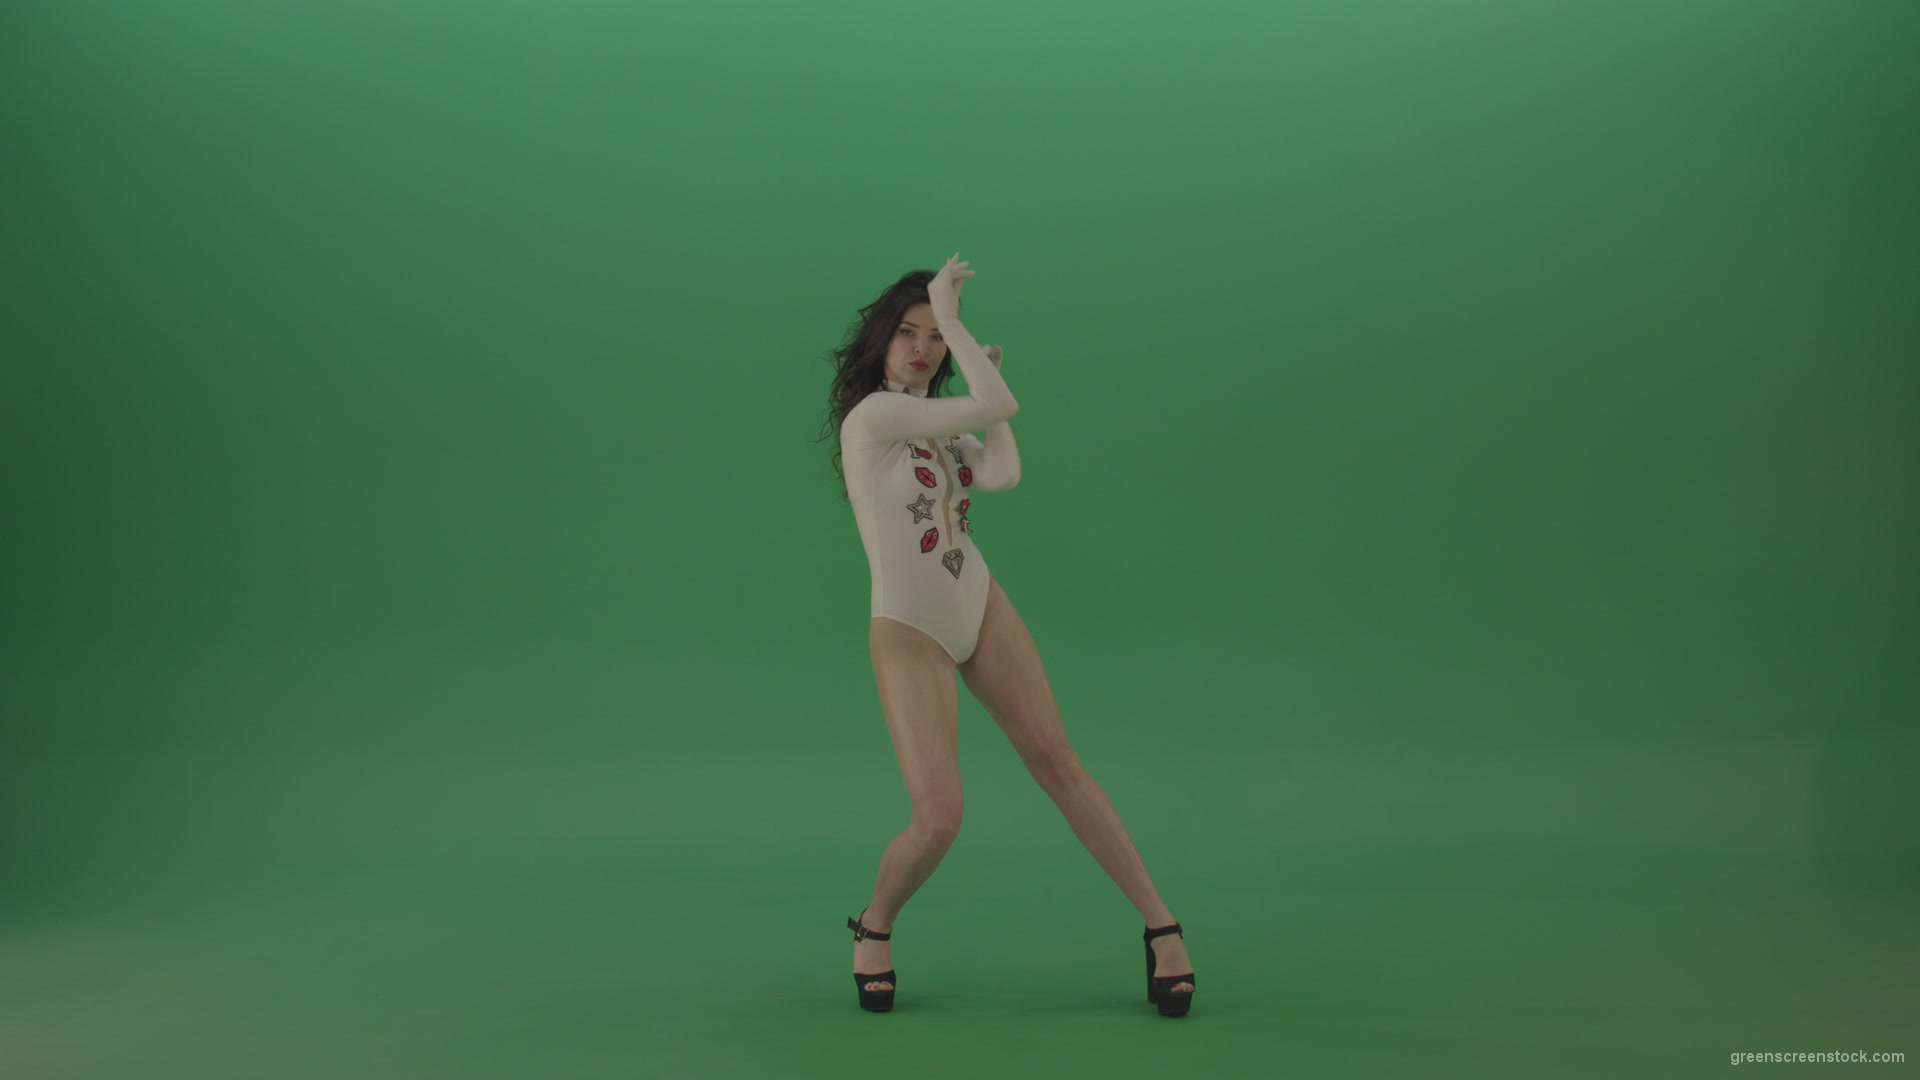 Beautiful-sexy-woman-seductively-elegantly-dancing-in-a-white-body-on-green-screen_004 Green Screen Stock